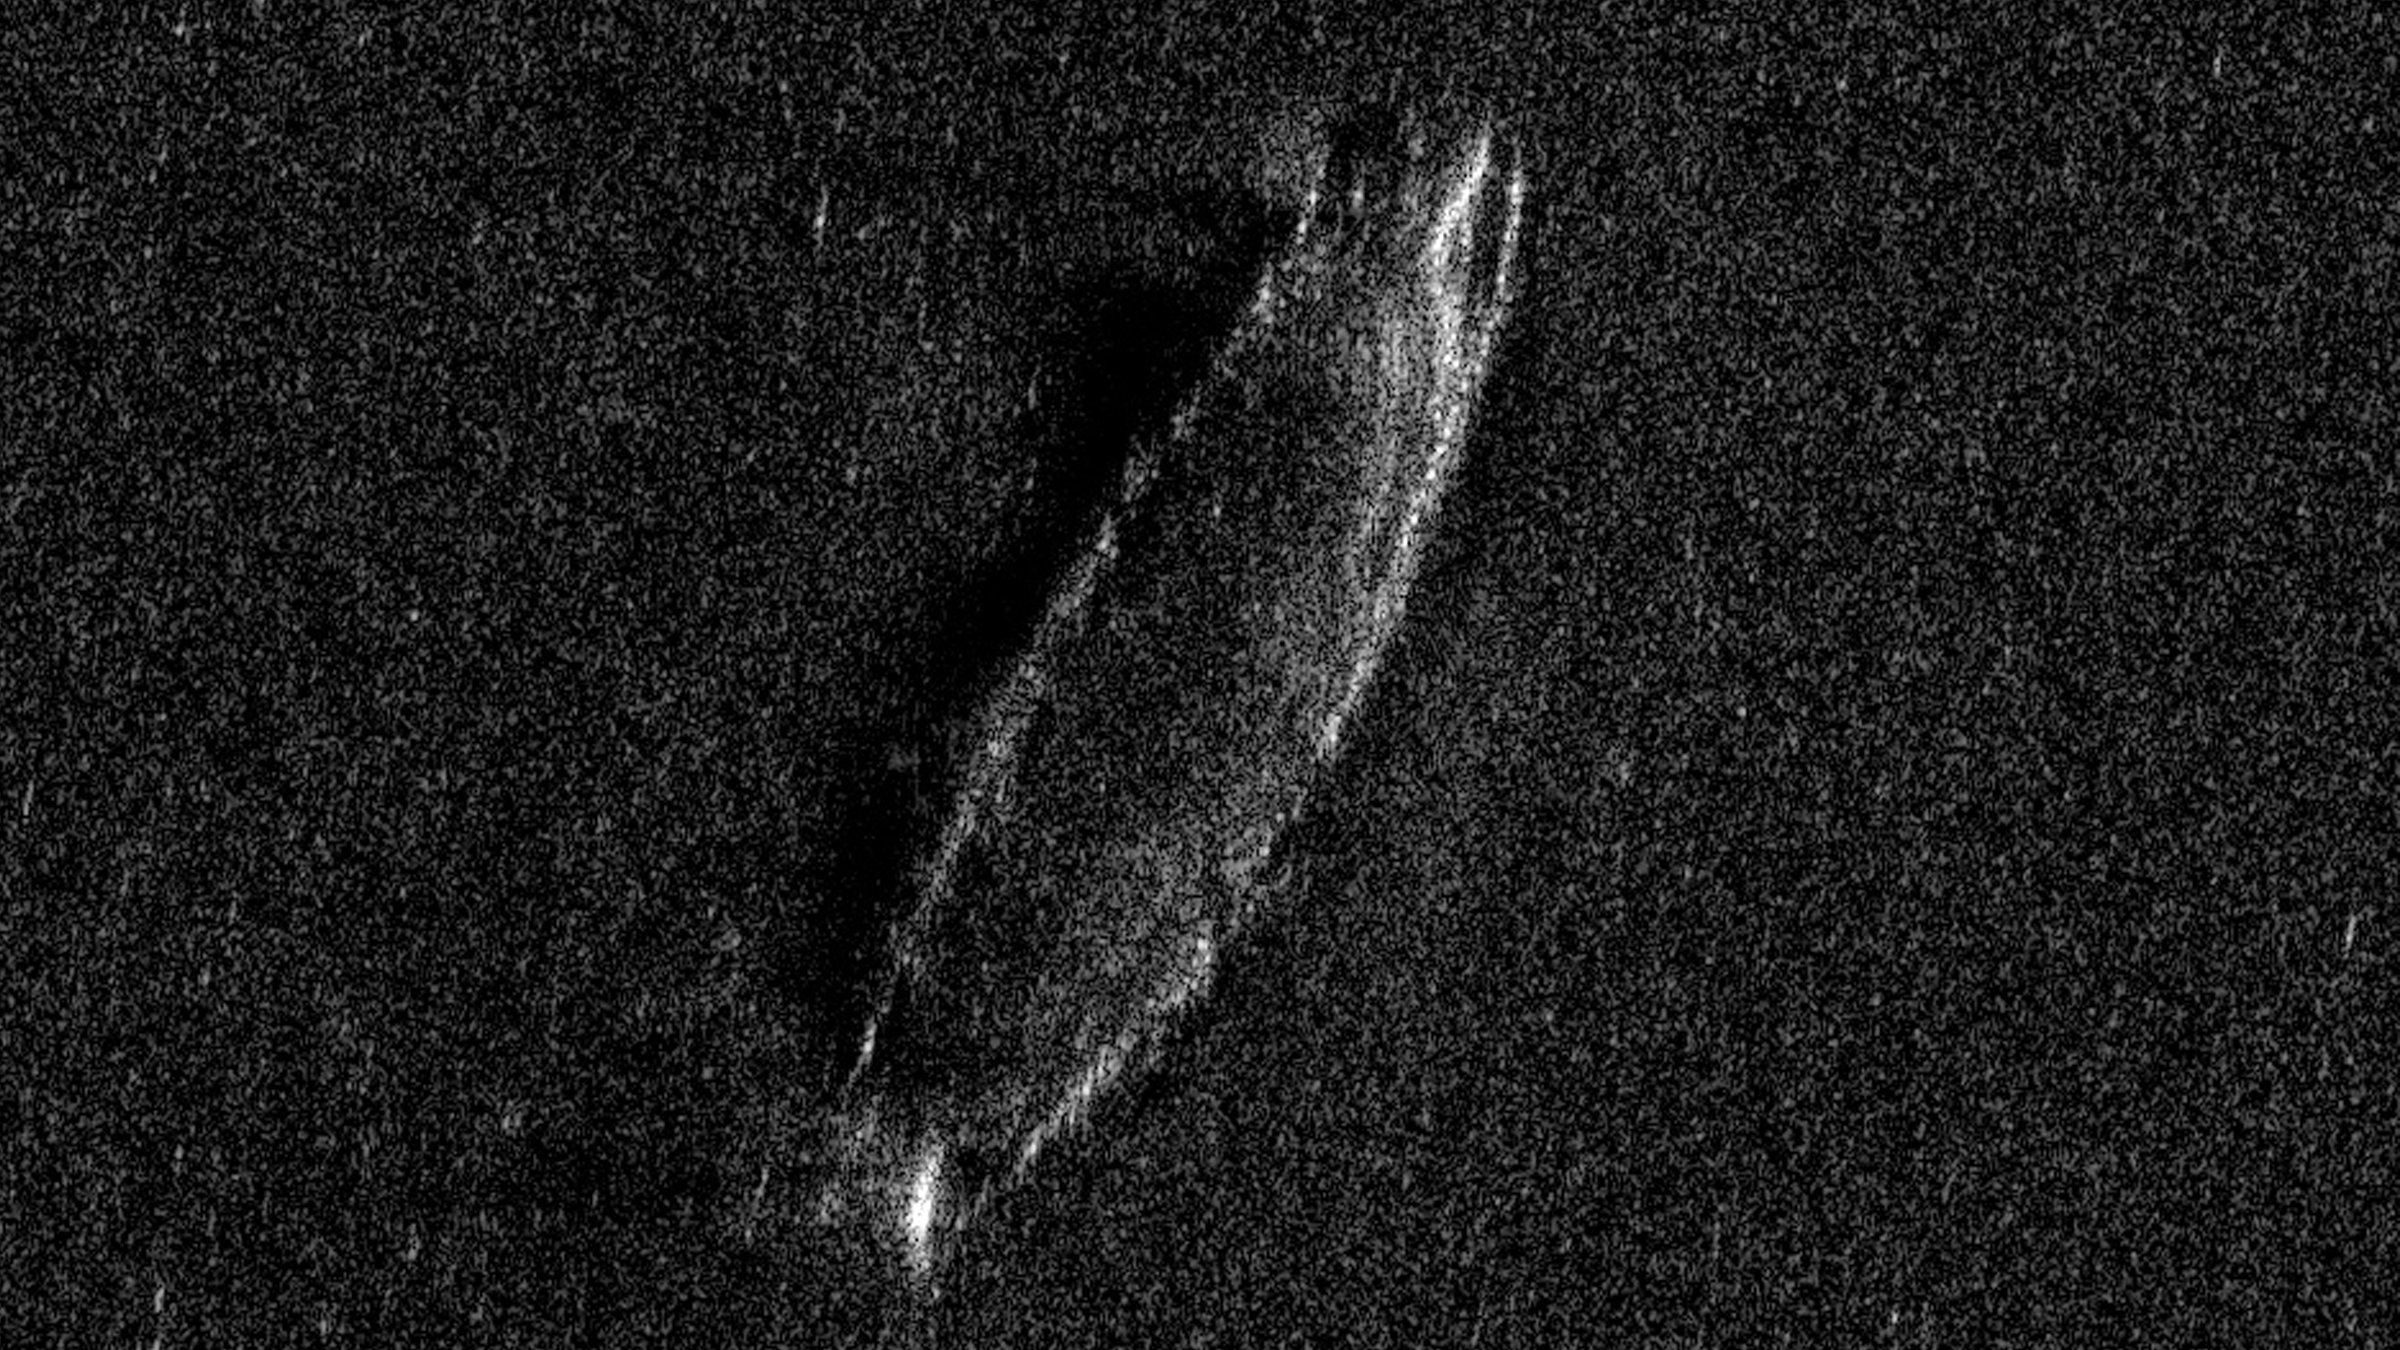 Researchers think the ship has a distinct bow and stern with a central rudder, which suggests it is from the medieval period after the 1300s.